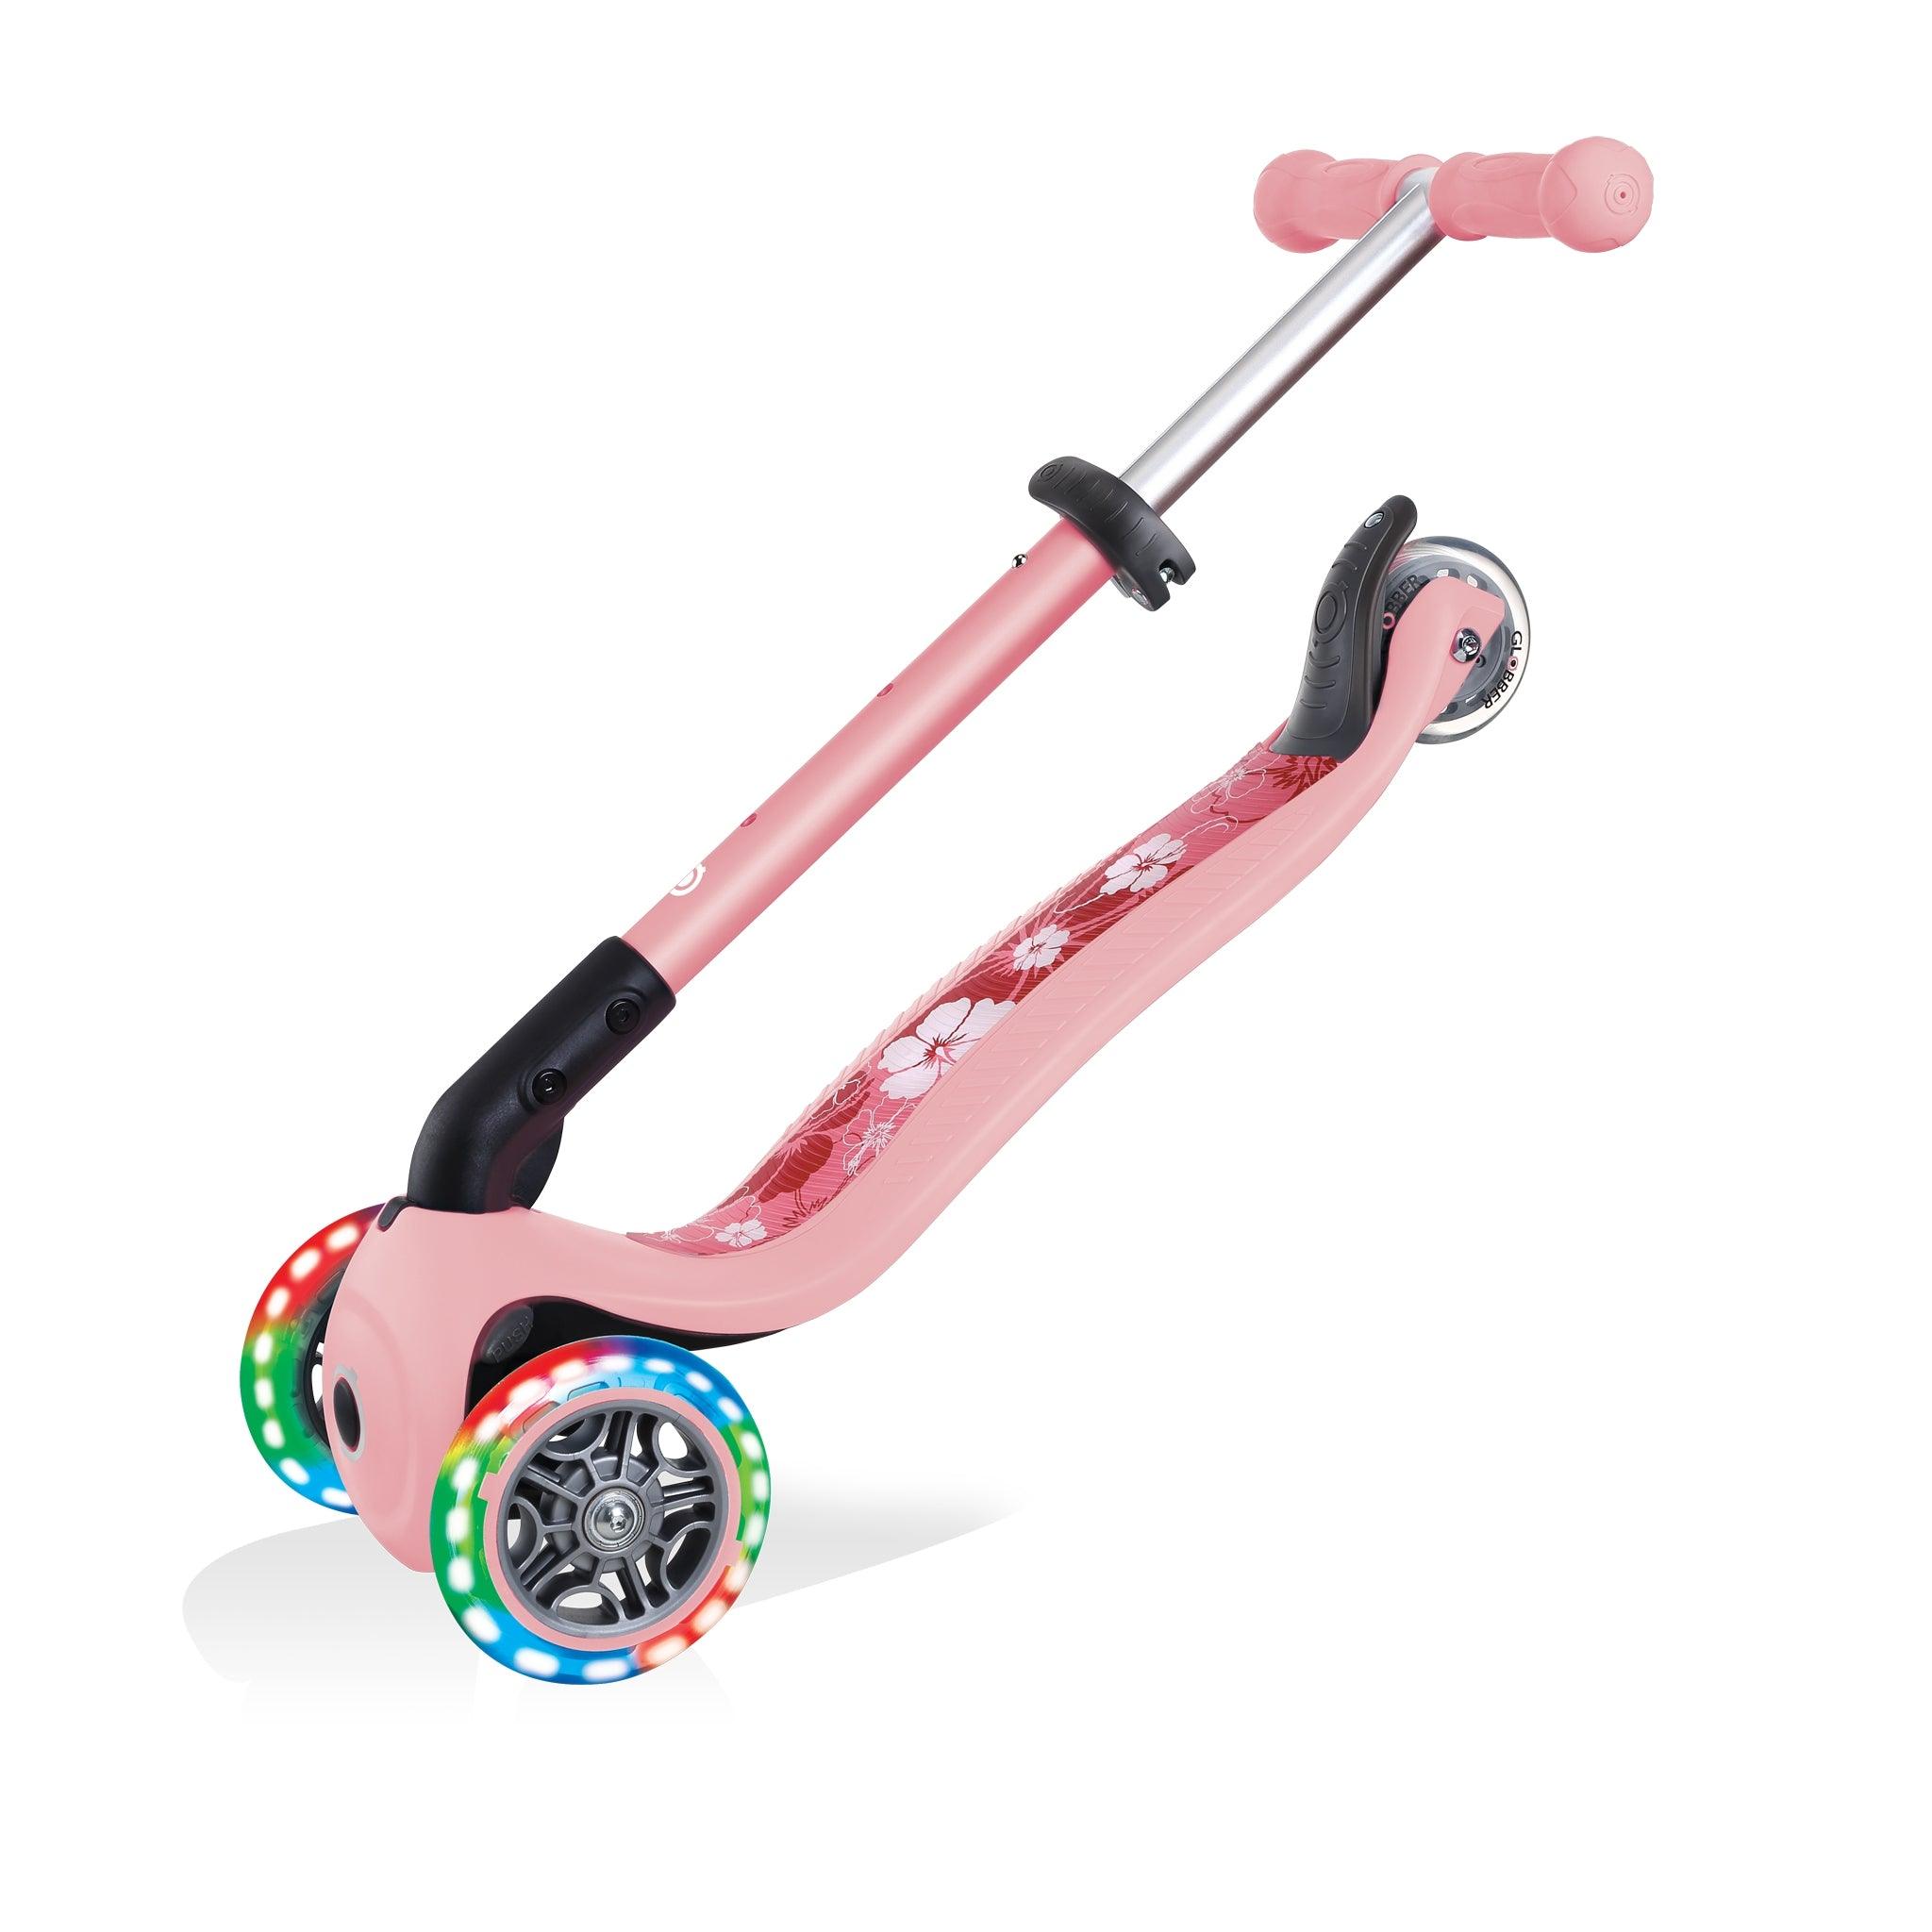 Globber Junior 3 Wheel Scooter Foldable Pink - Karout Online -Karout Online Shopping In lebanon - Karout Express Delivery 